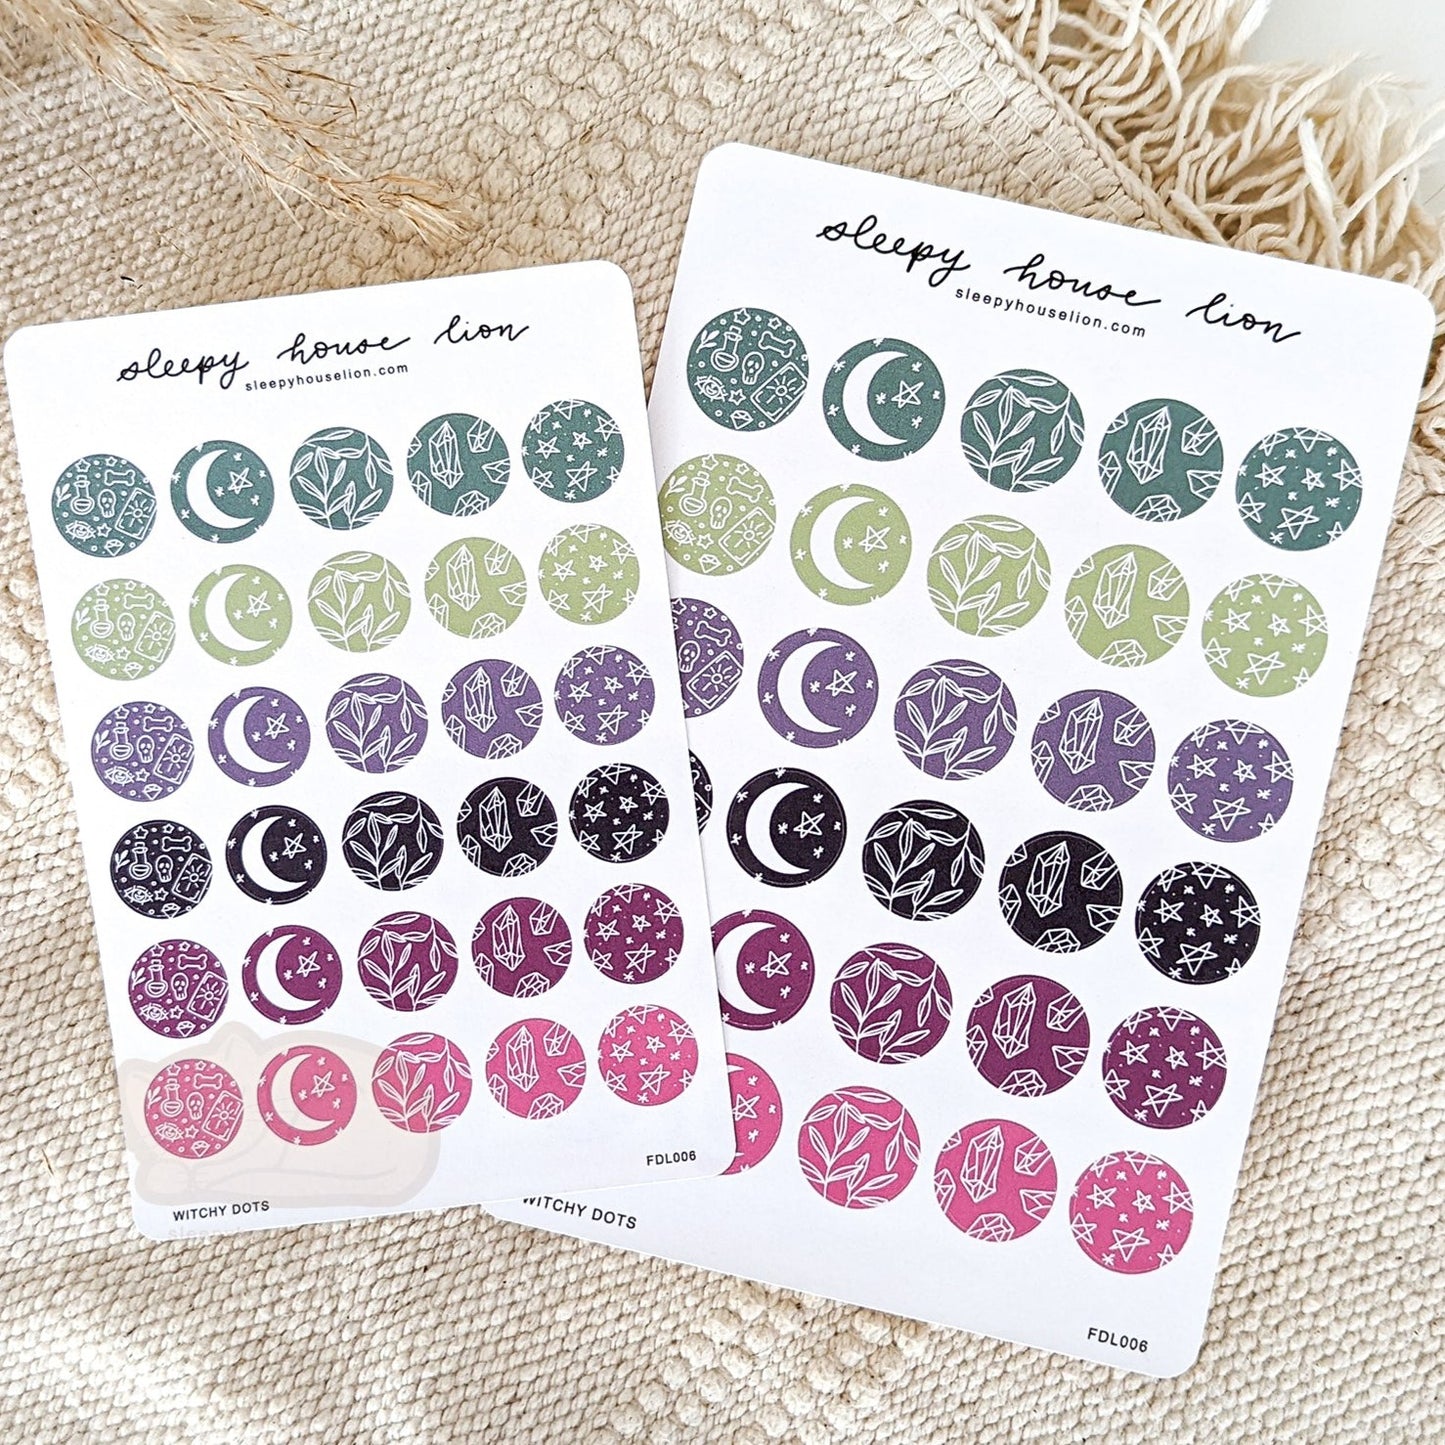 WITCHY DOTS STICKER SHEET